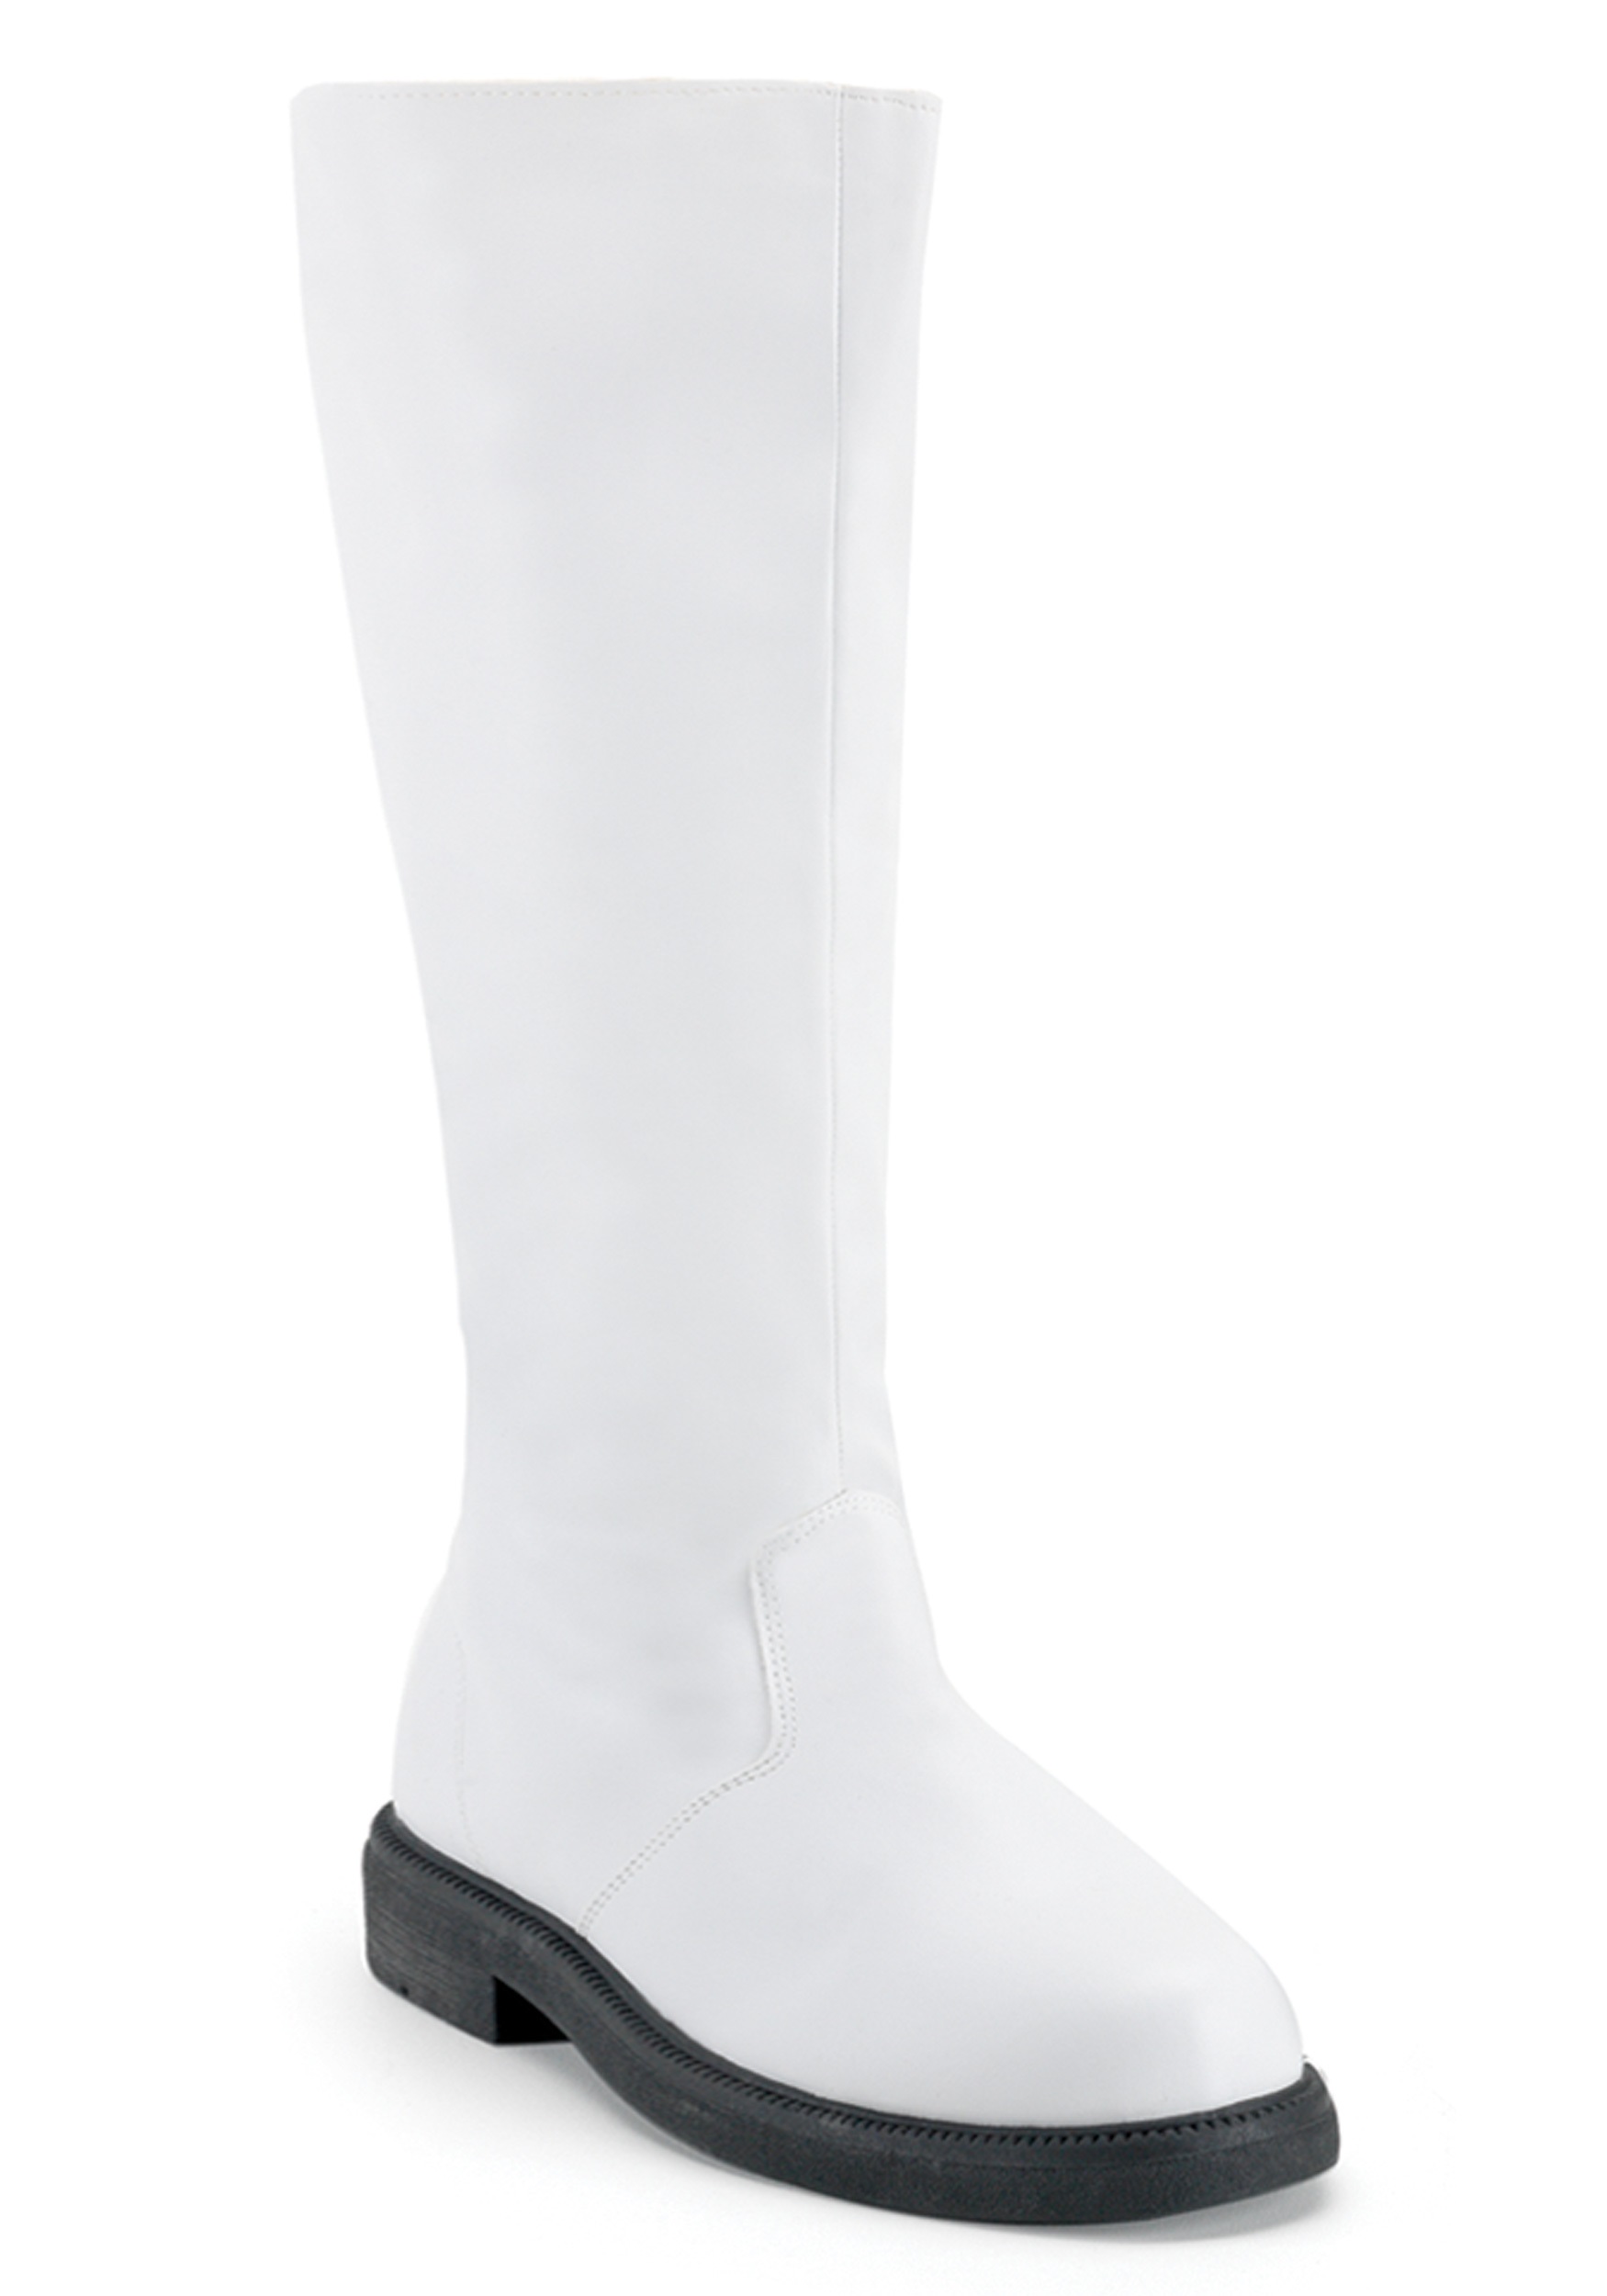 white boots adult white costume boots dvwiwld